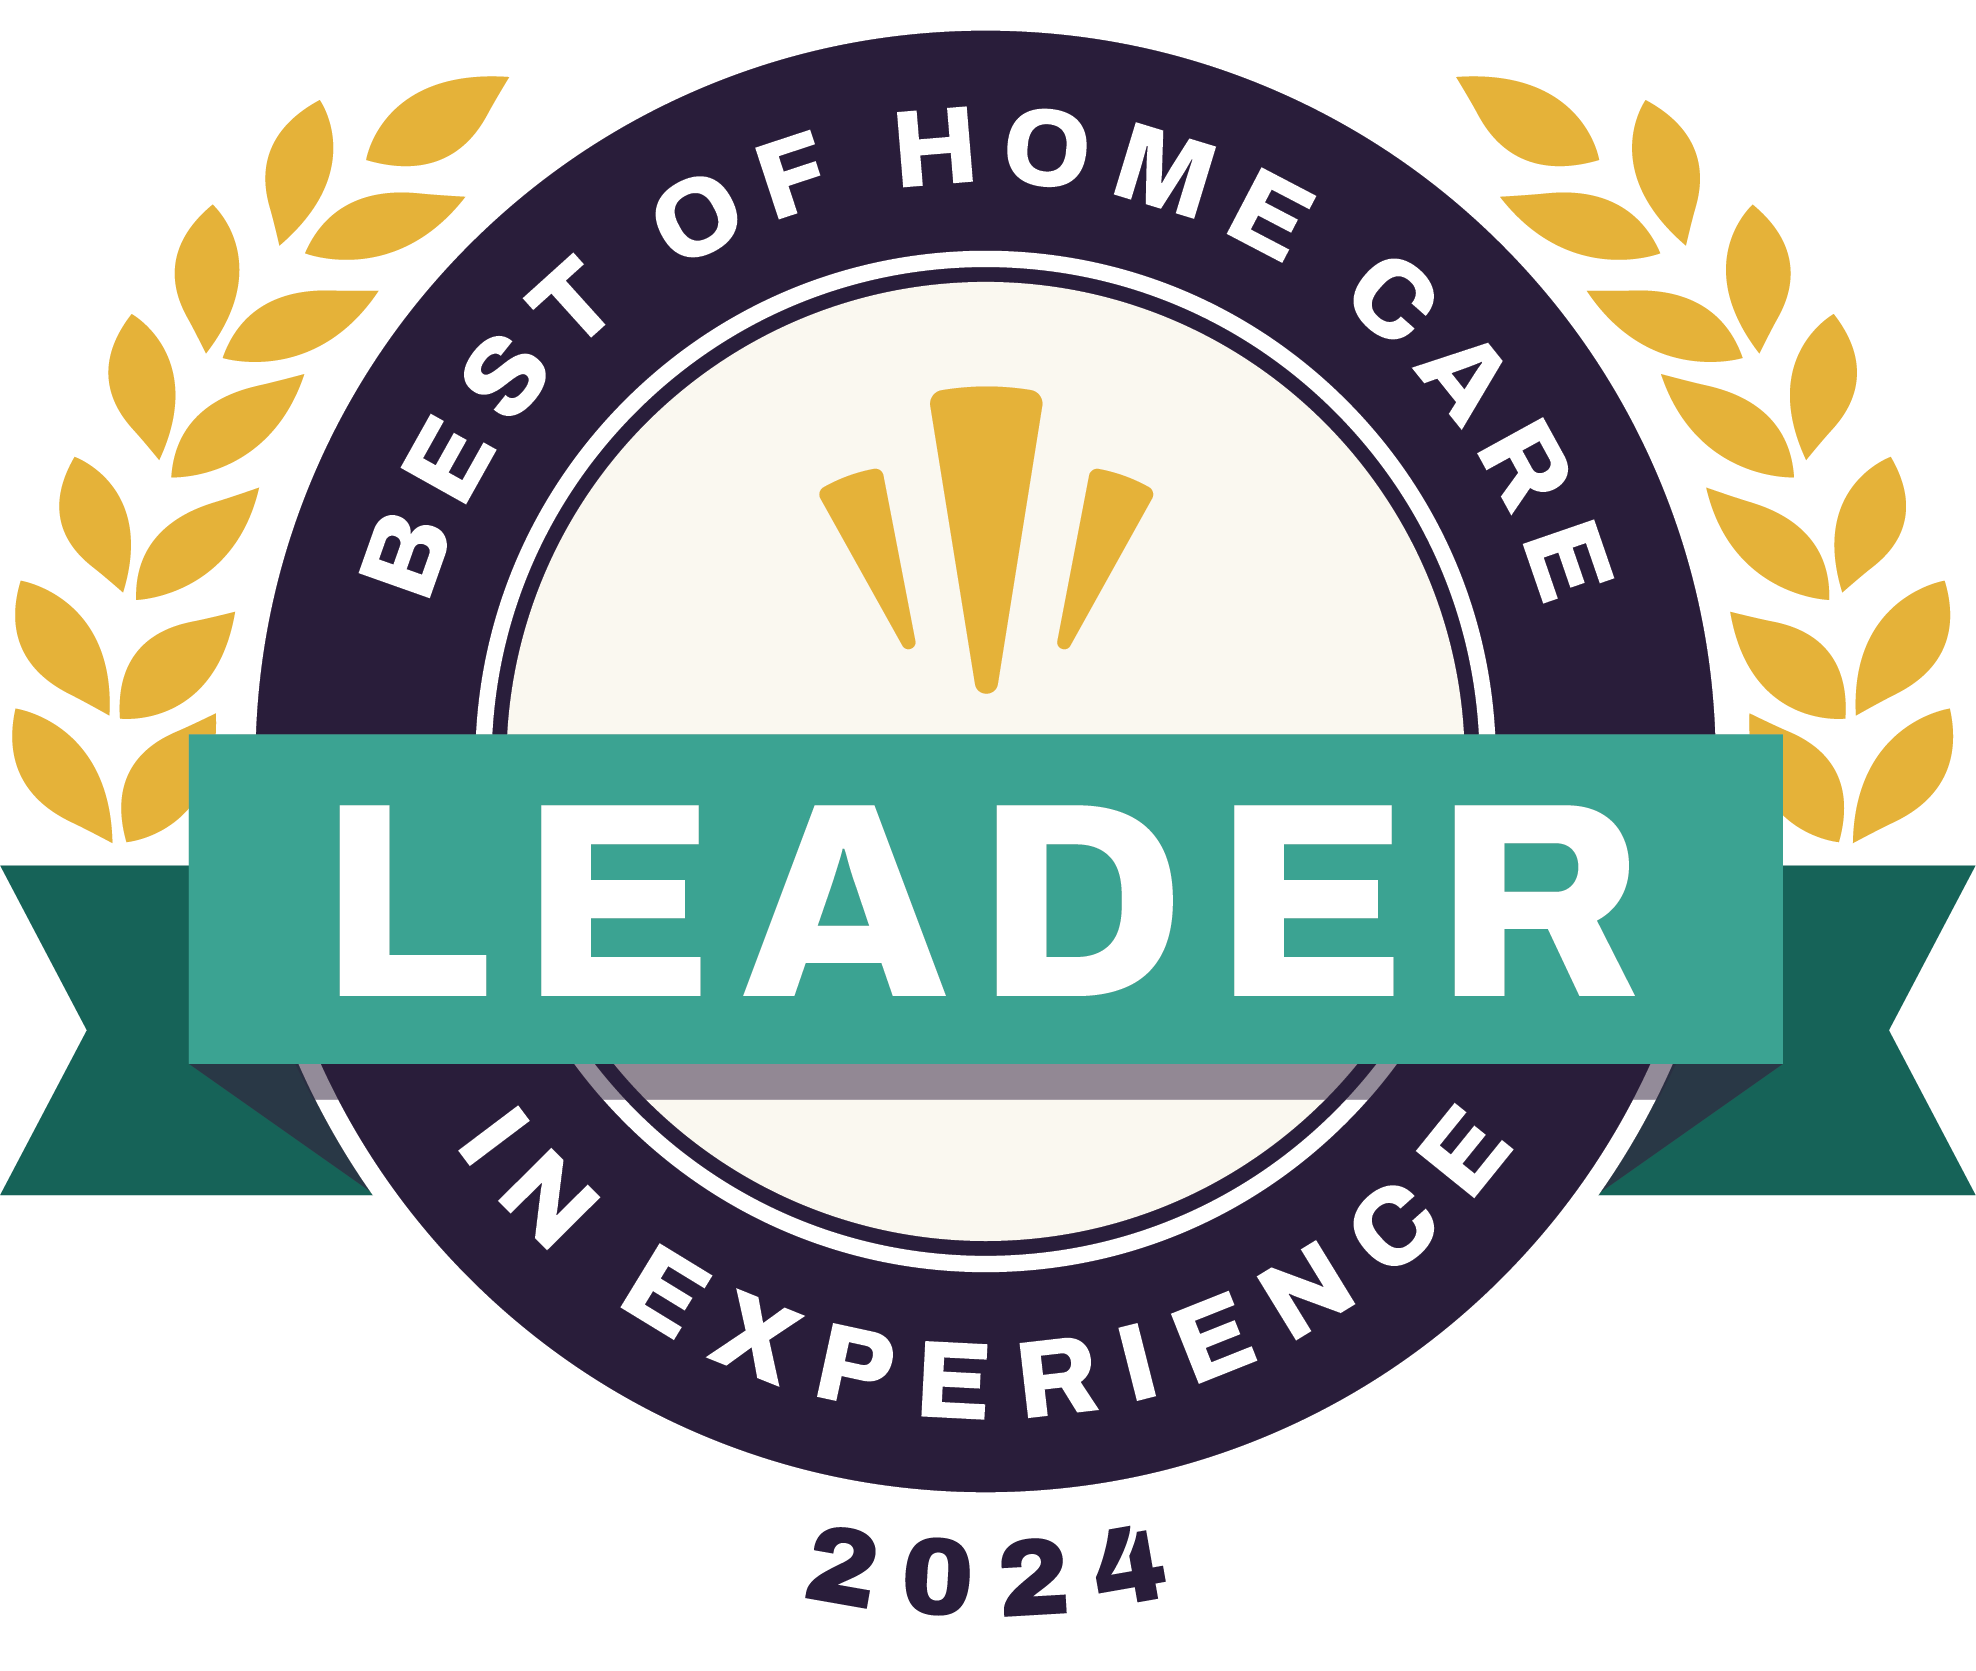 Best of home care leader in experience badge